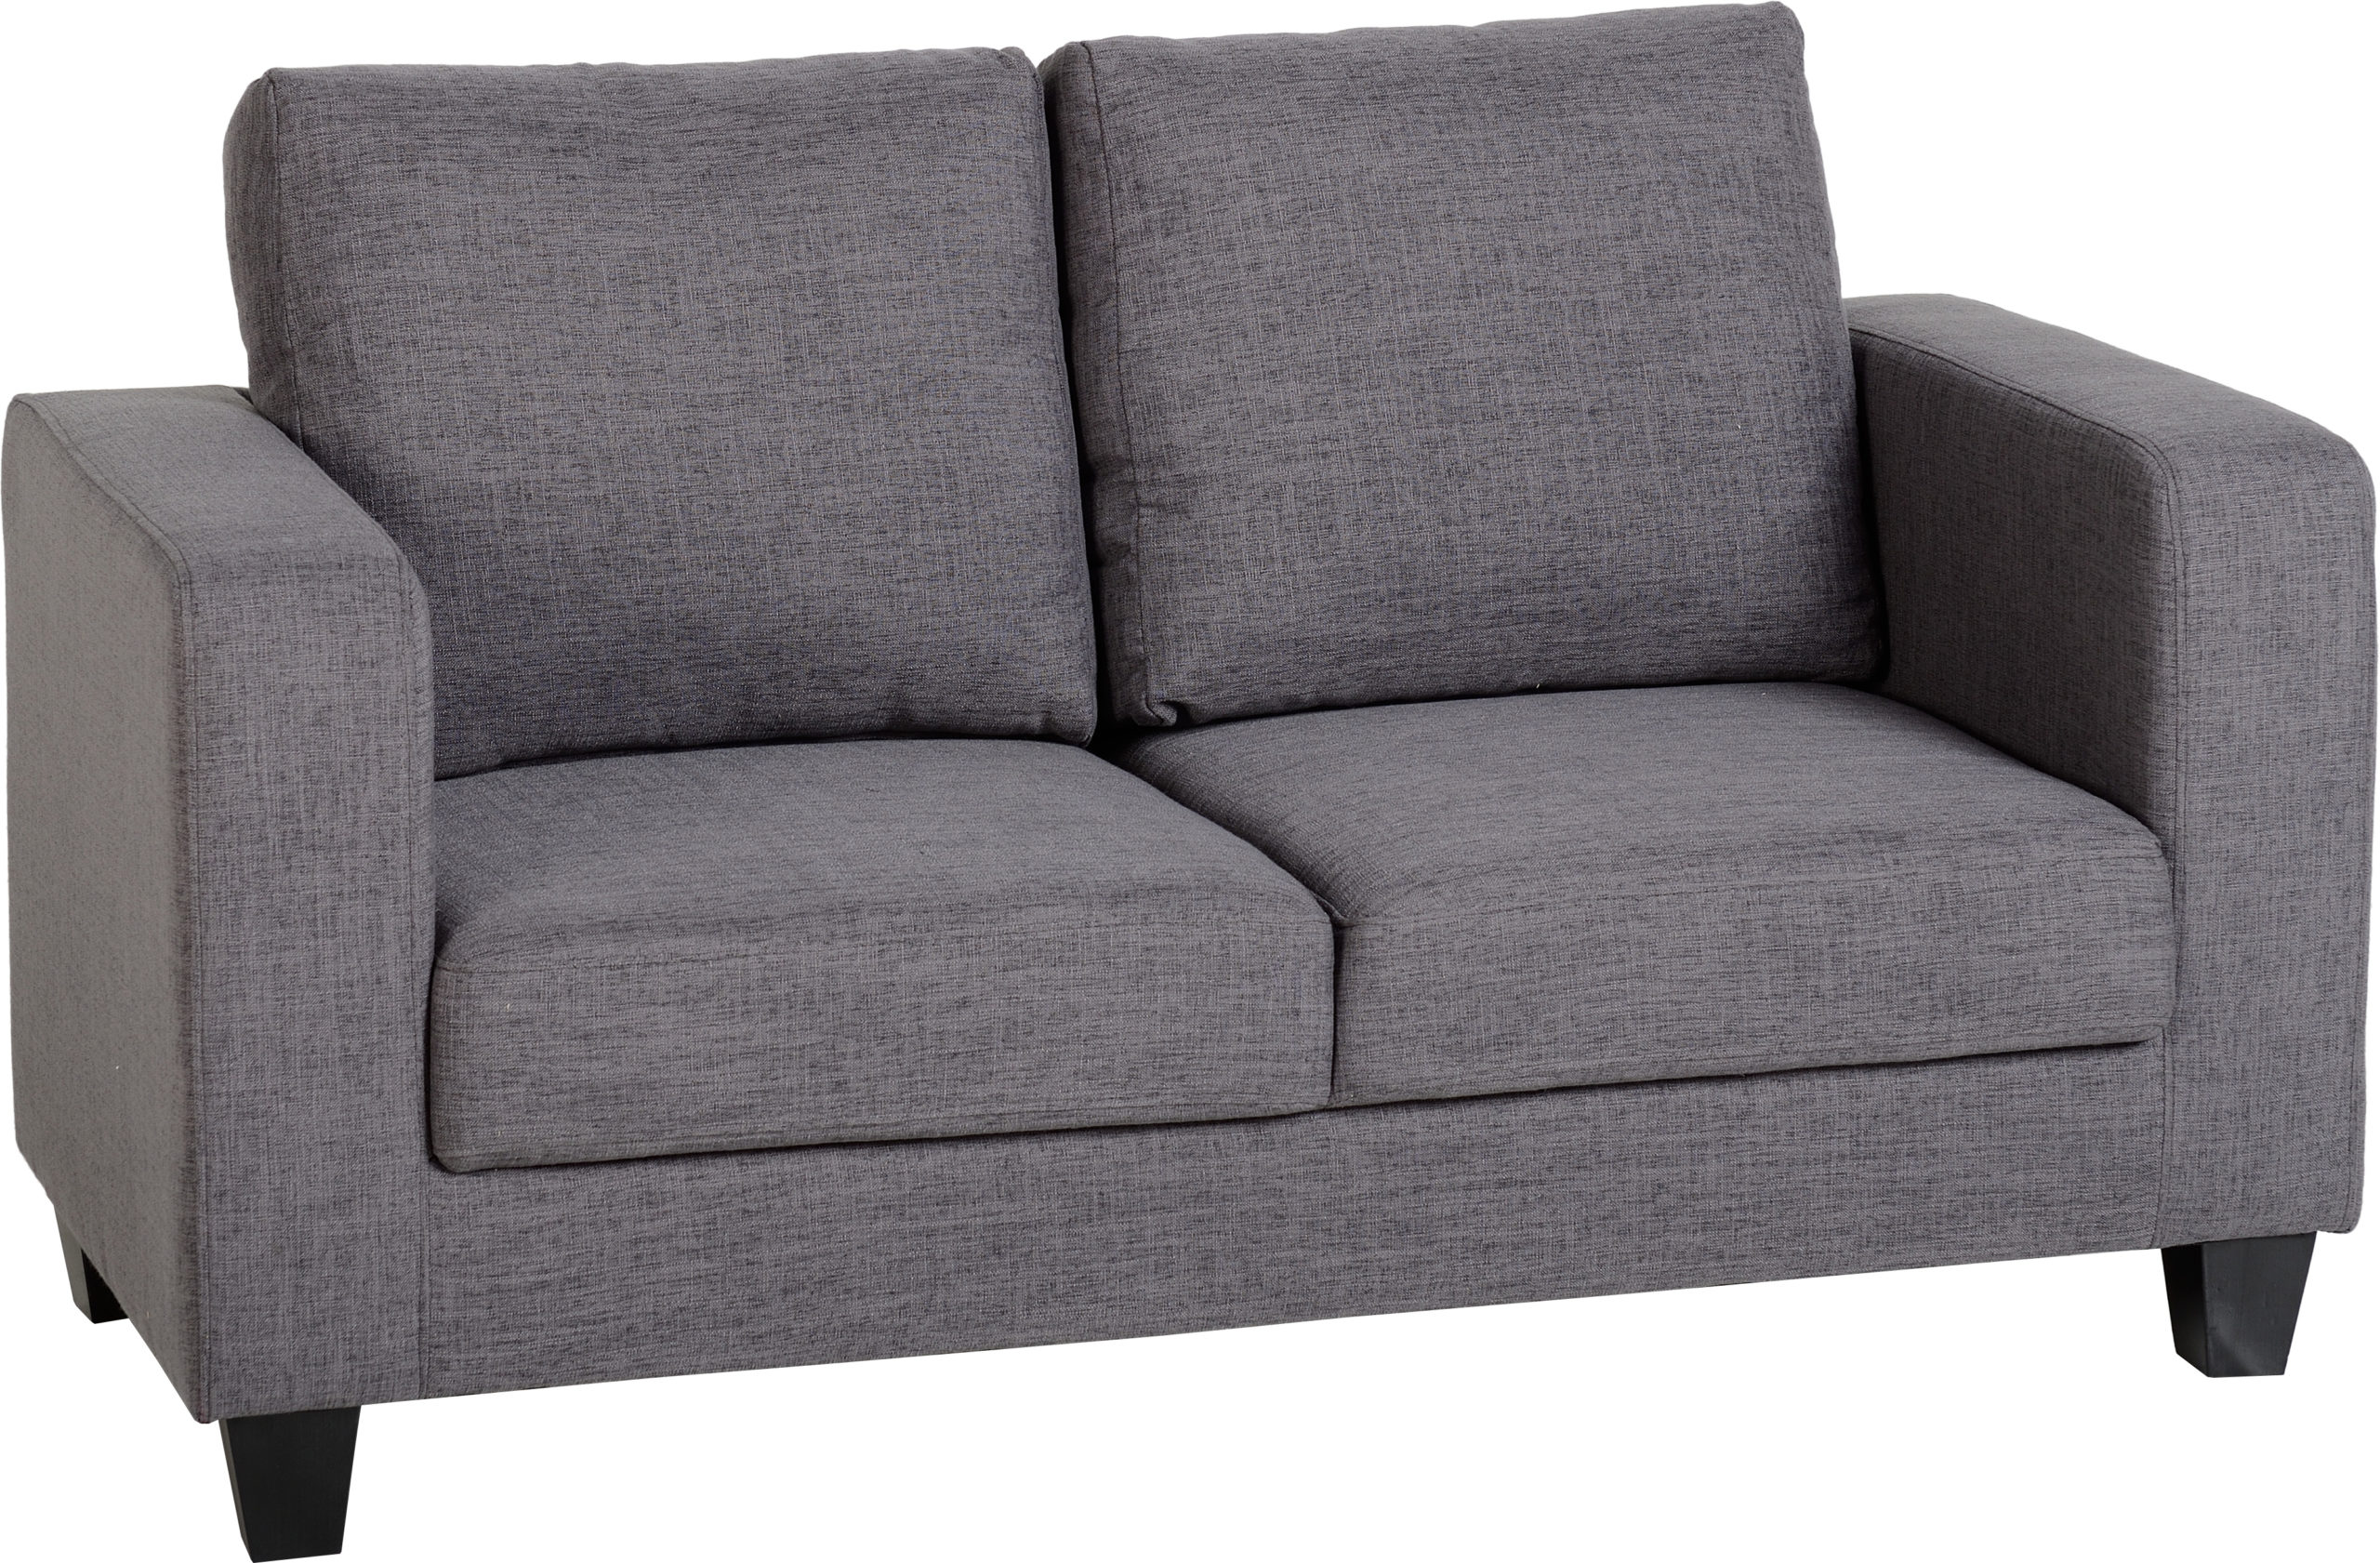 2 seaters sofa bed